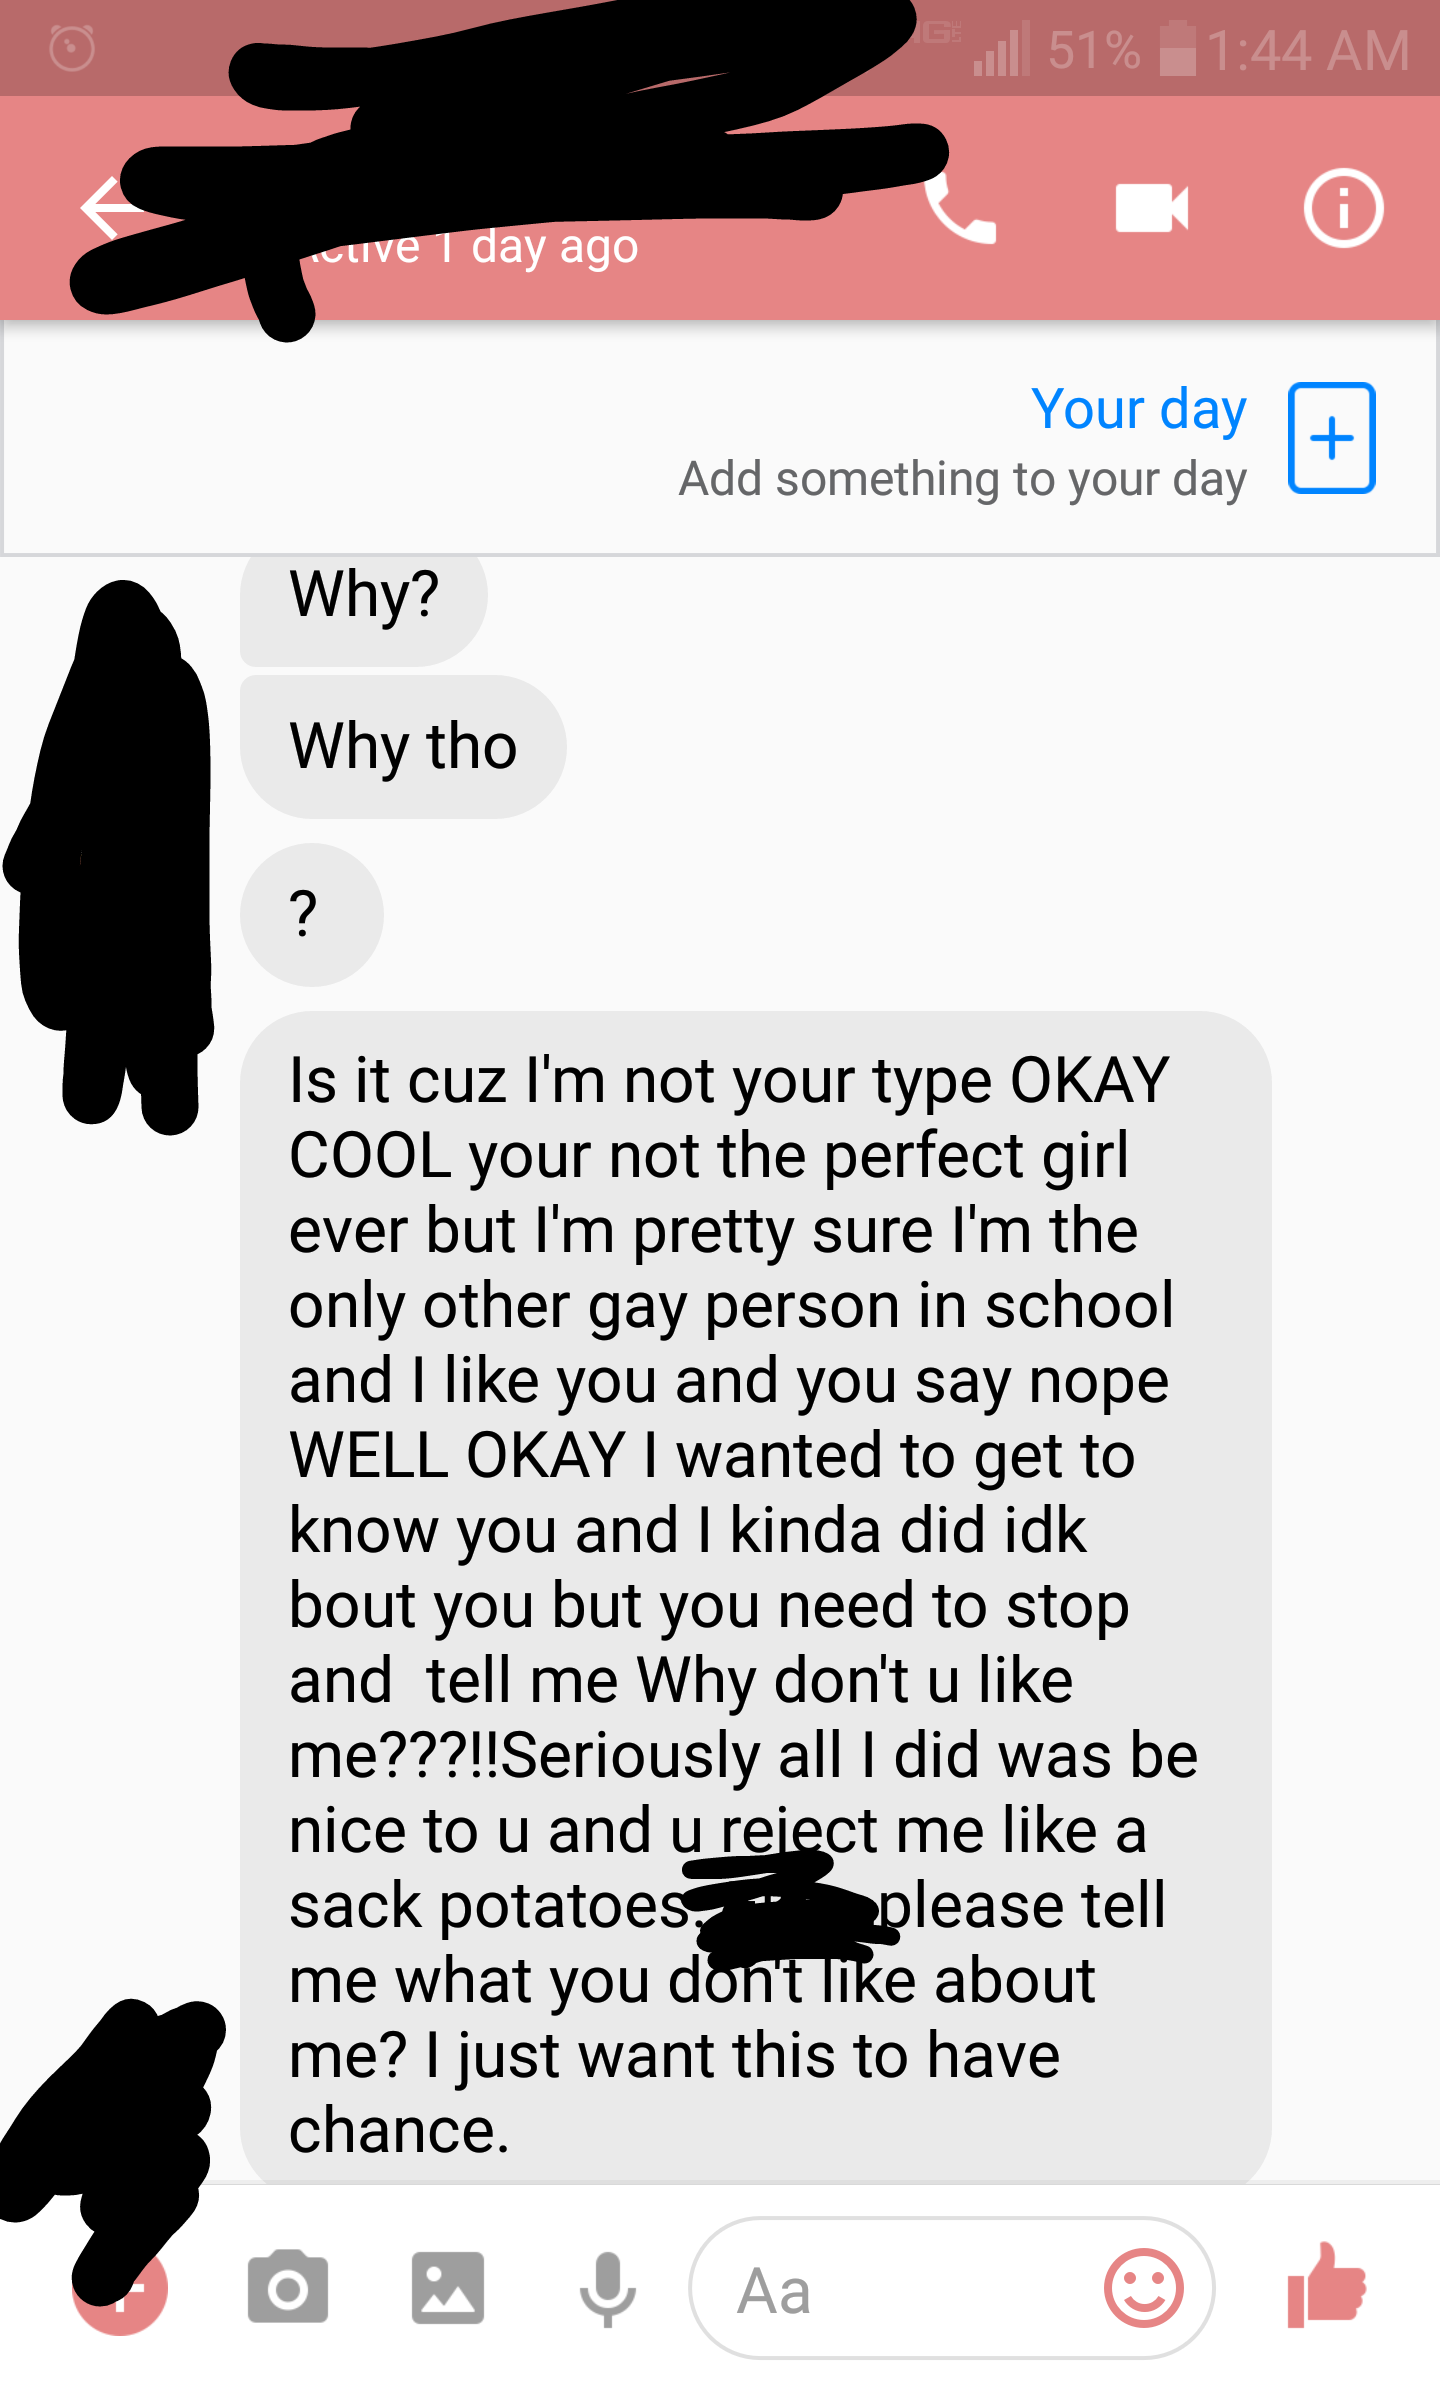 nice girls cringe - ...ll 51% vulve 1 day ago Your day Add something to your day Why? Why tho Is it cuz I'm not your type Okay Cool your not the perfect girl ever but I'm pretty sure I'm the only other gay person in school and I you and you say nope Well 